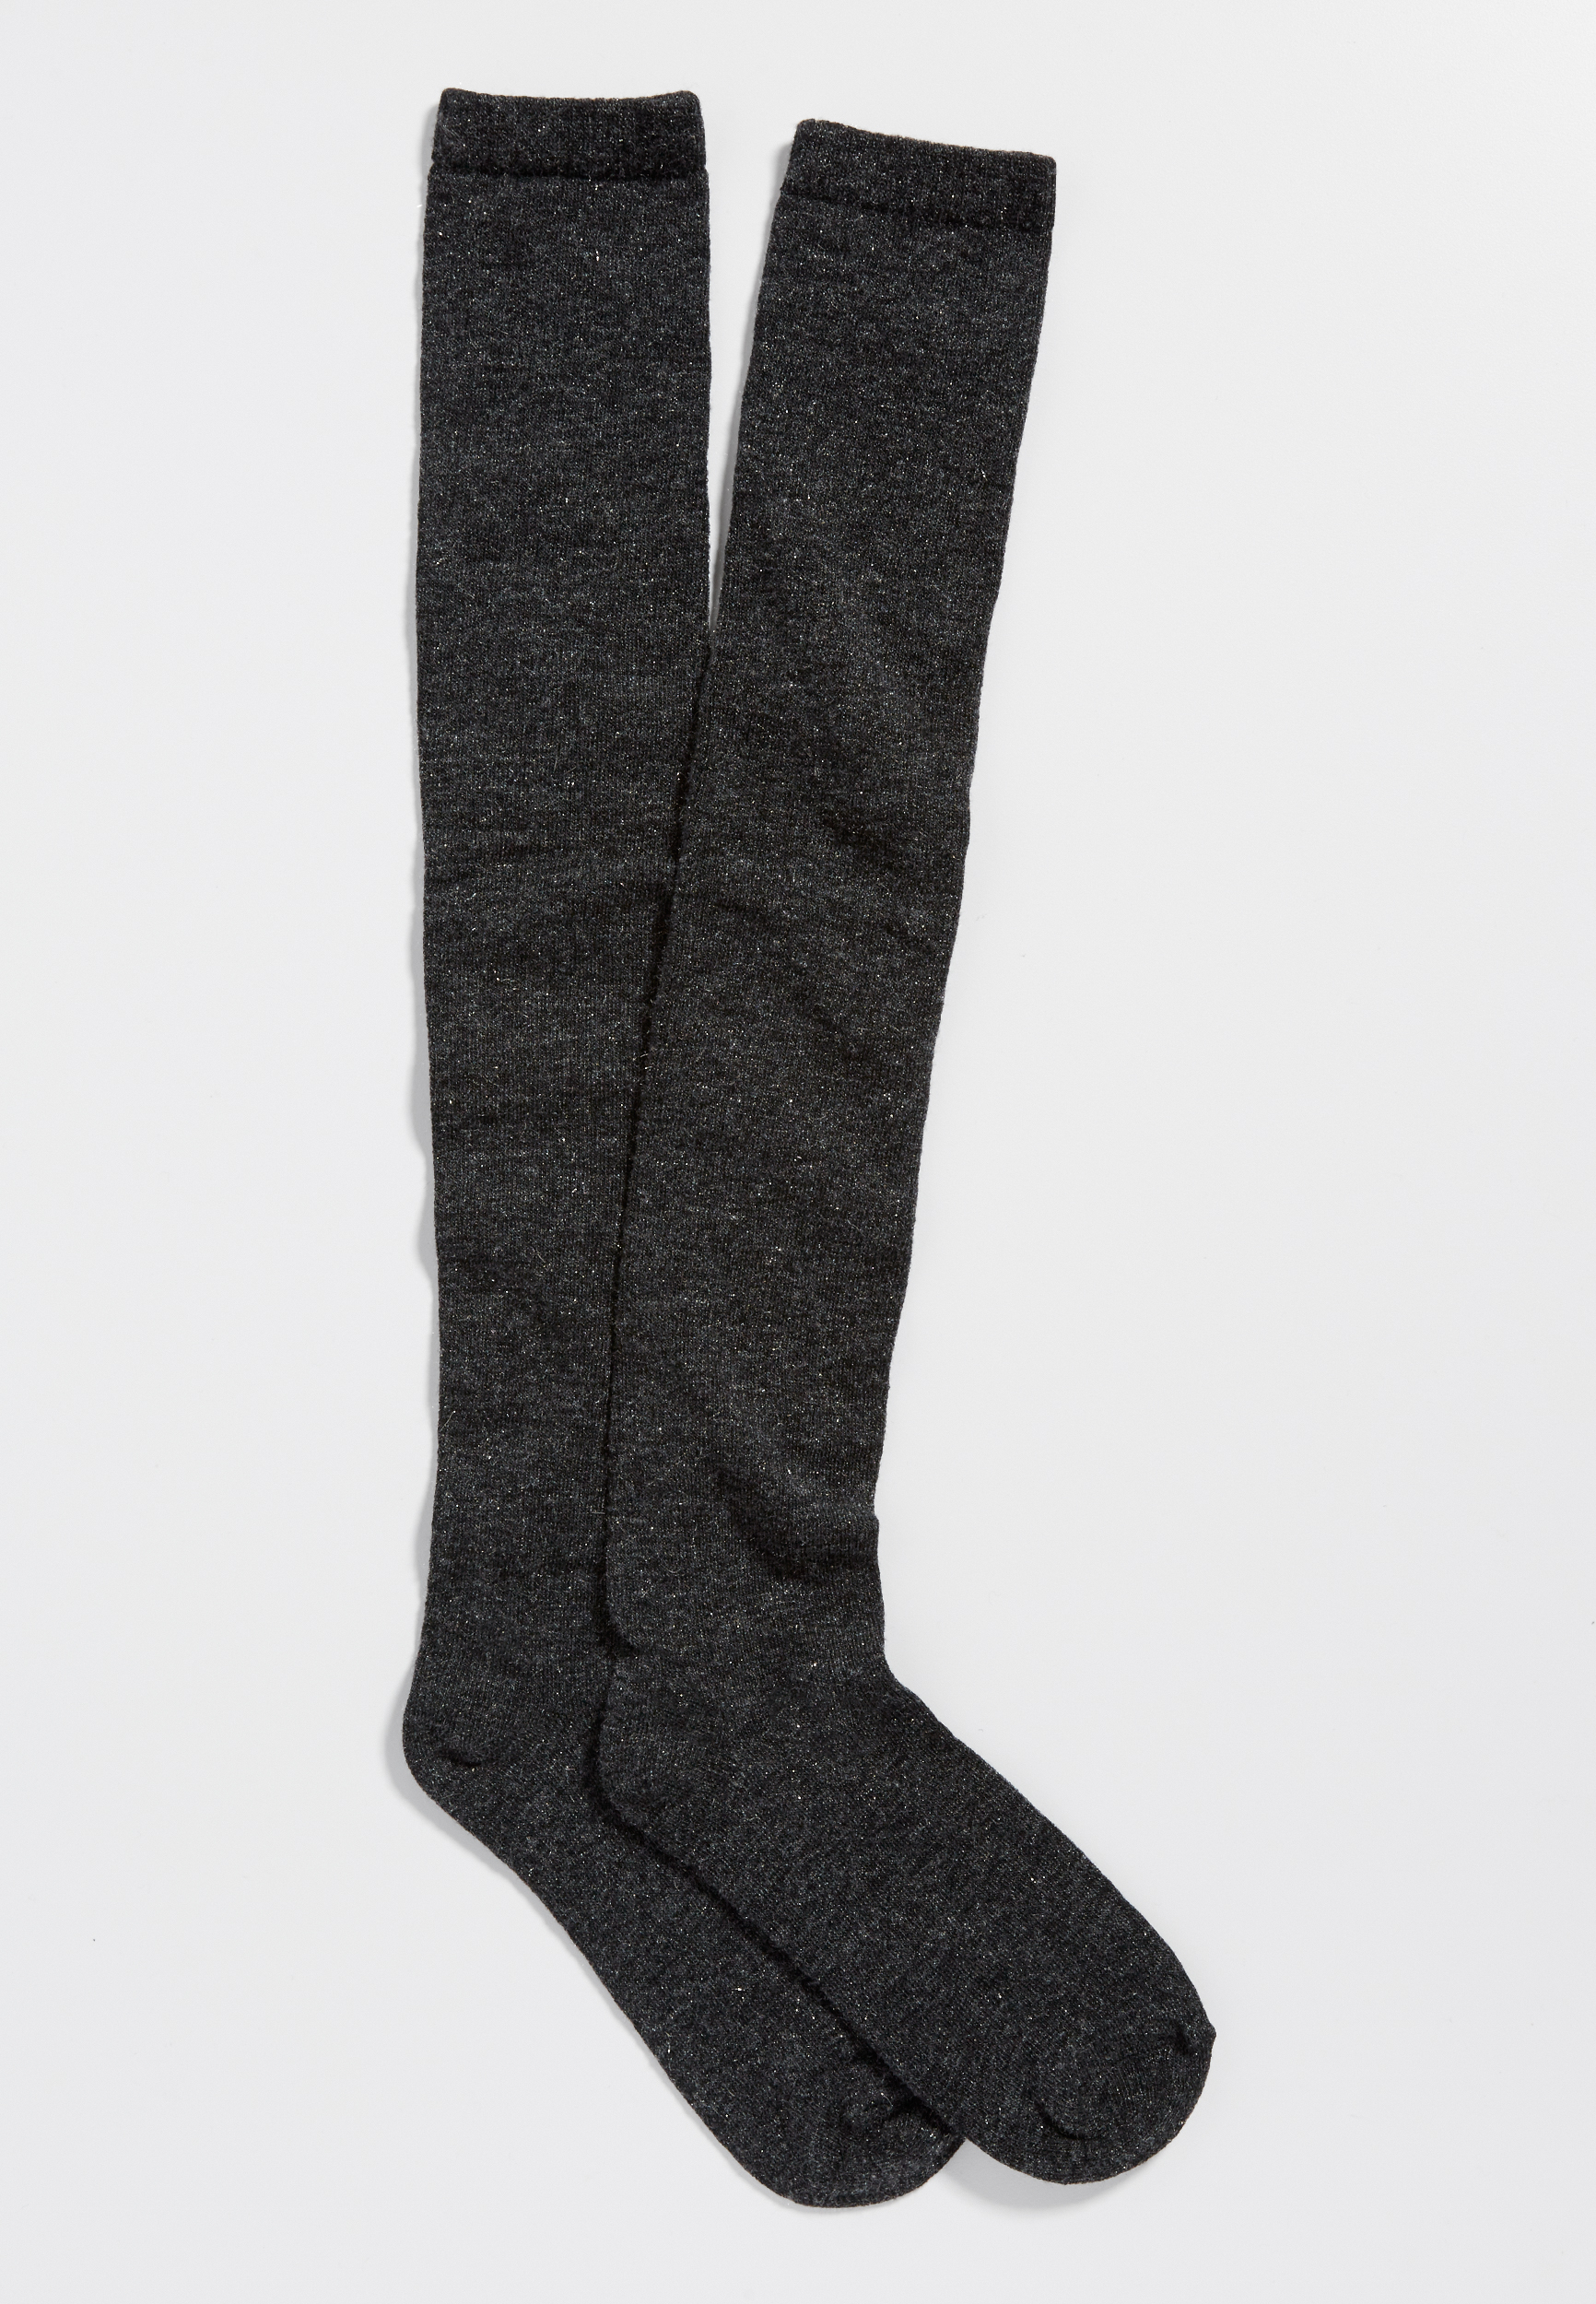 super soft boot socks with metallic shimmer in gray | maurices